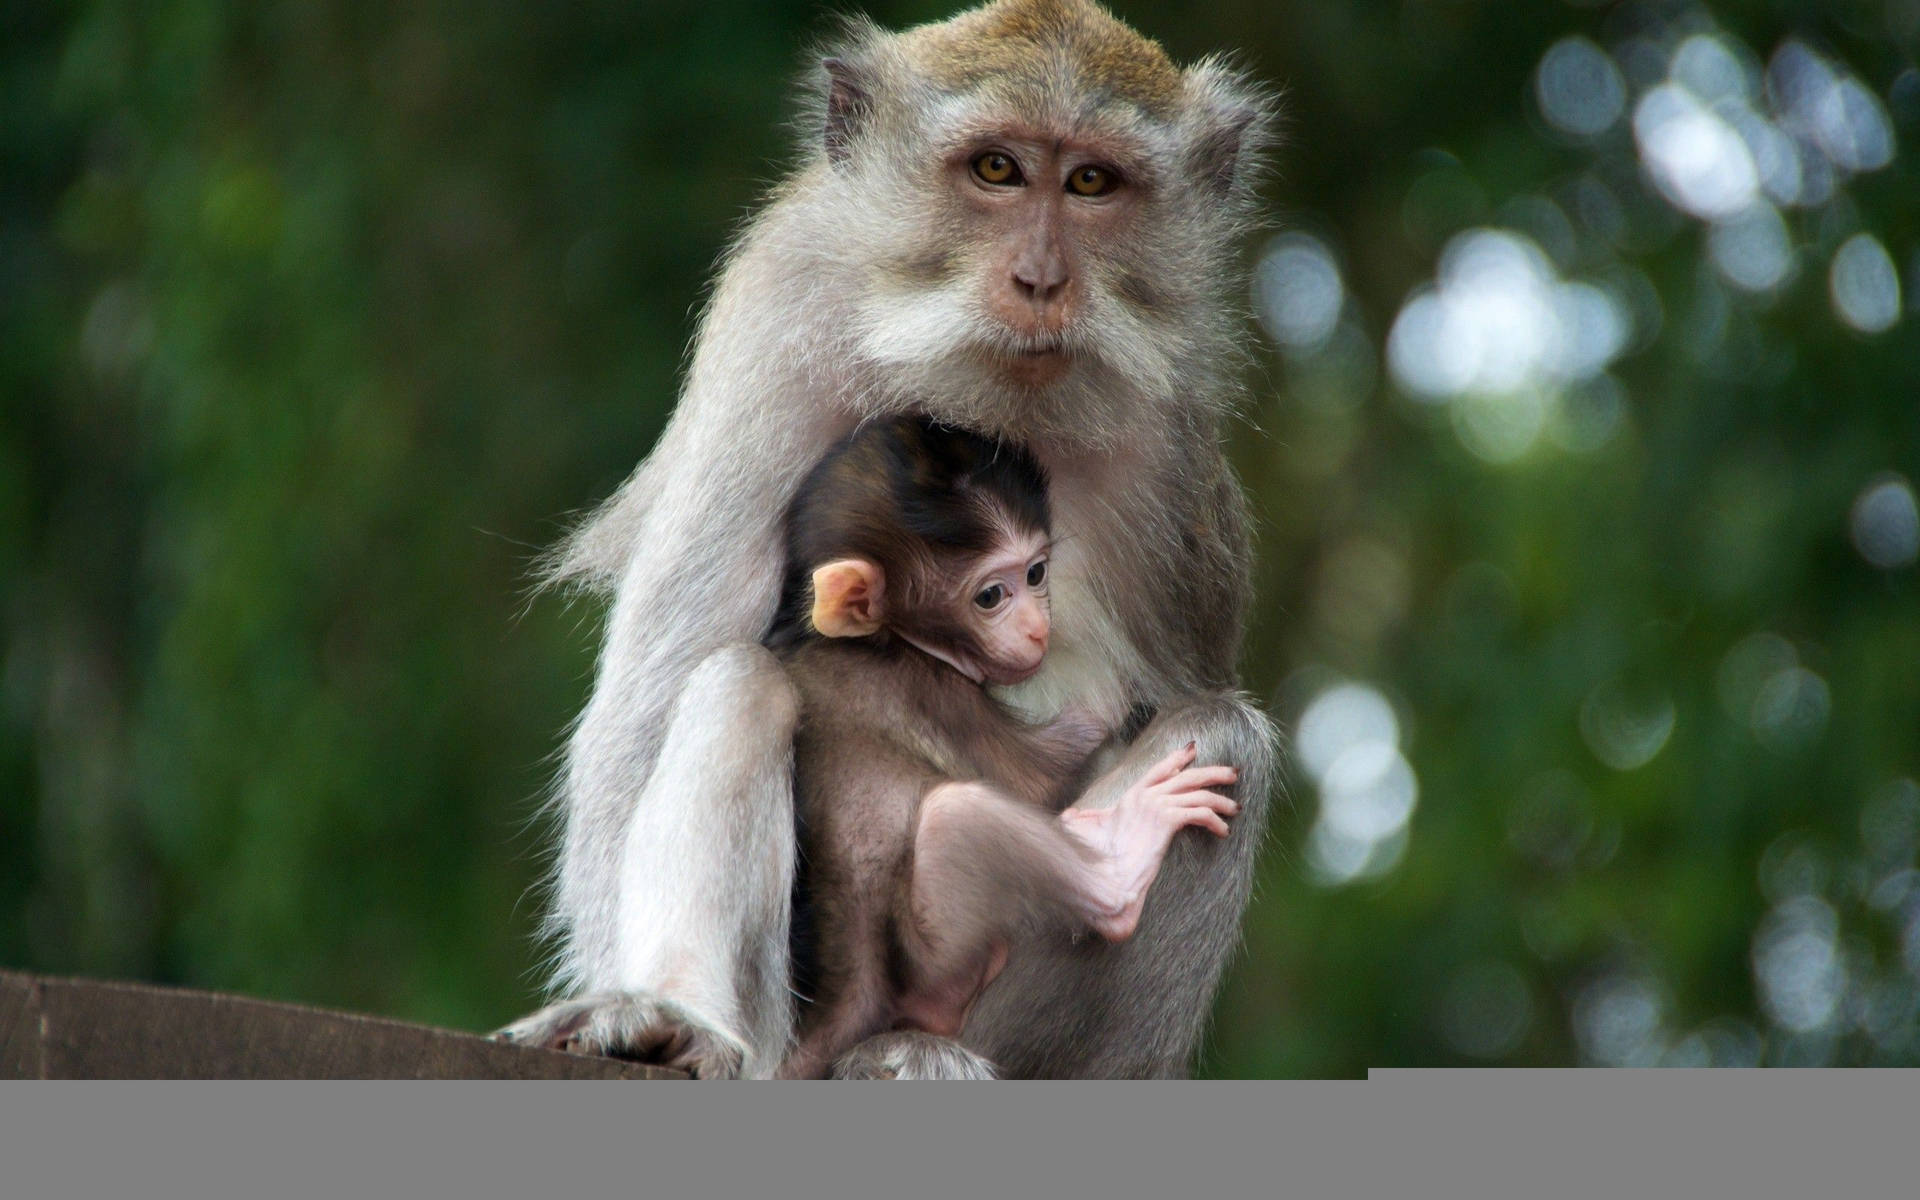 Cute Monkey Hiding With Its Mother Wallpaper